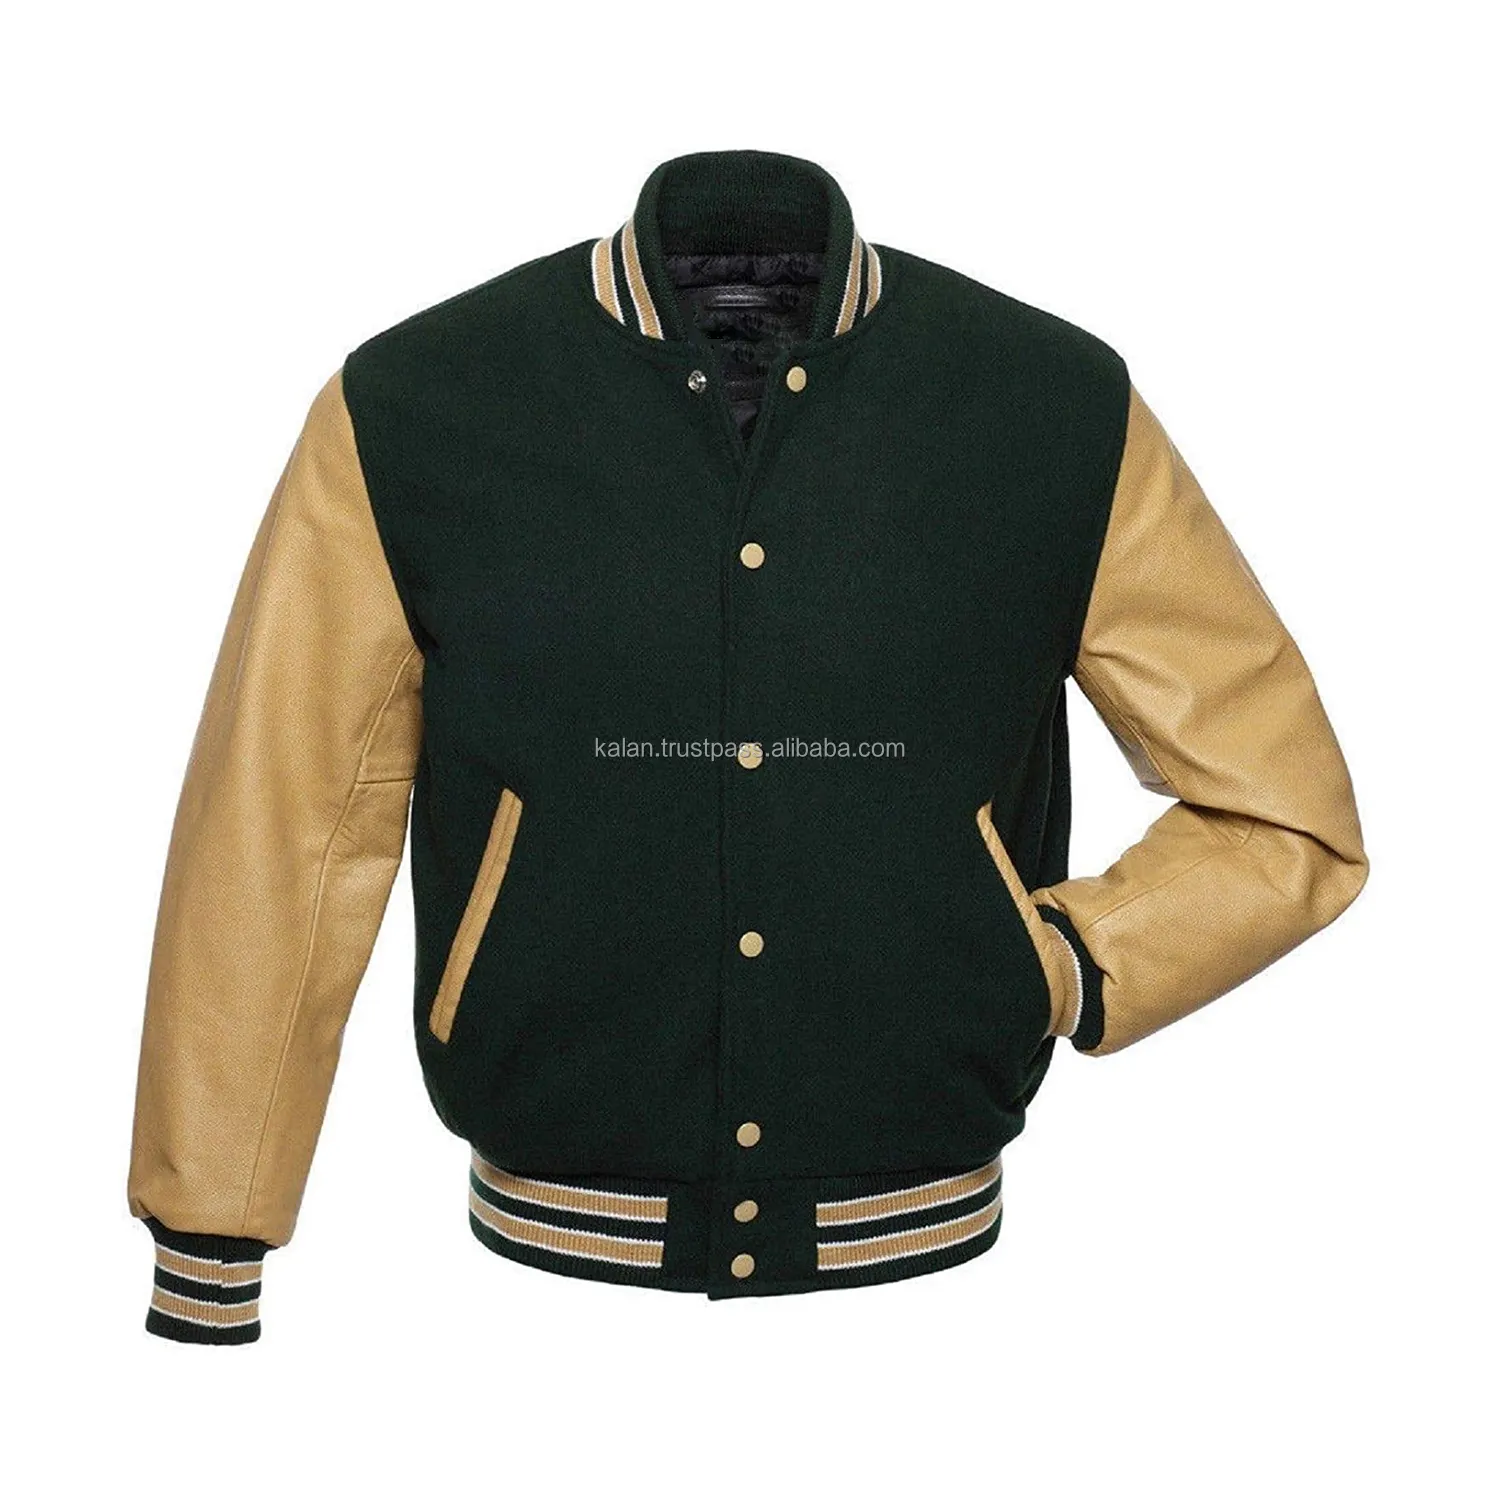 Varsity Winter Custom Heated Coats and Warm Clothing Army Green Color Golden Sleeves Casual Organic Wool Body Jacket